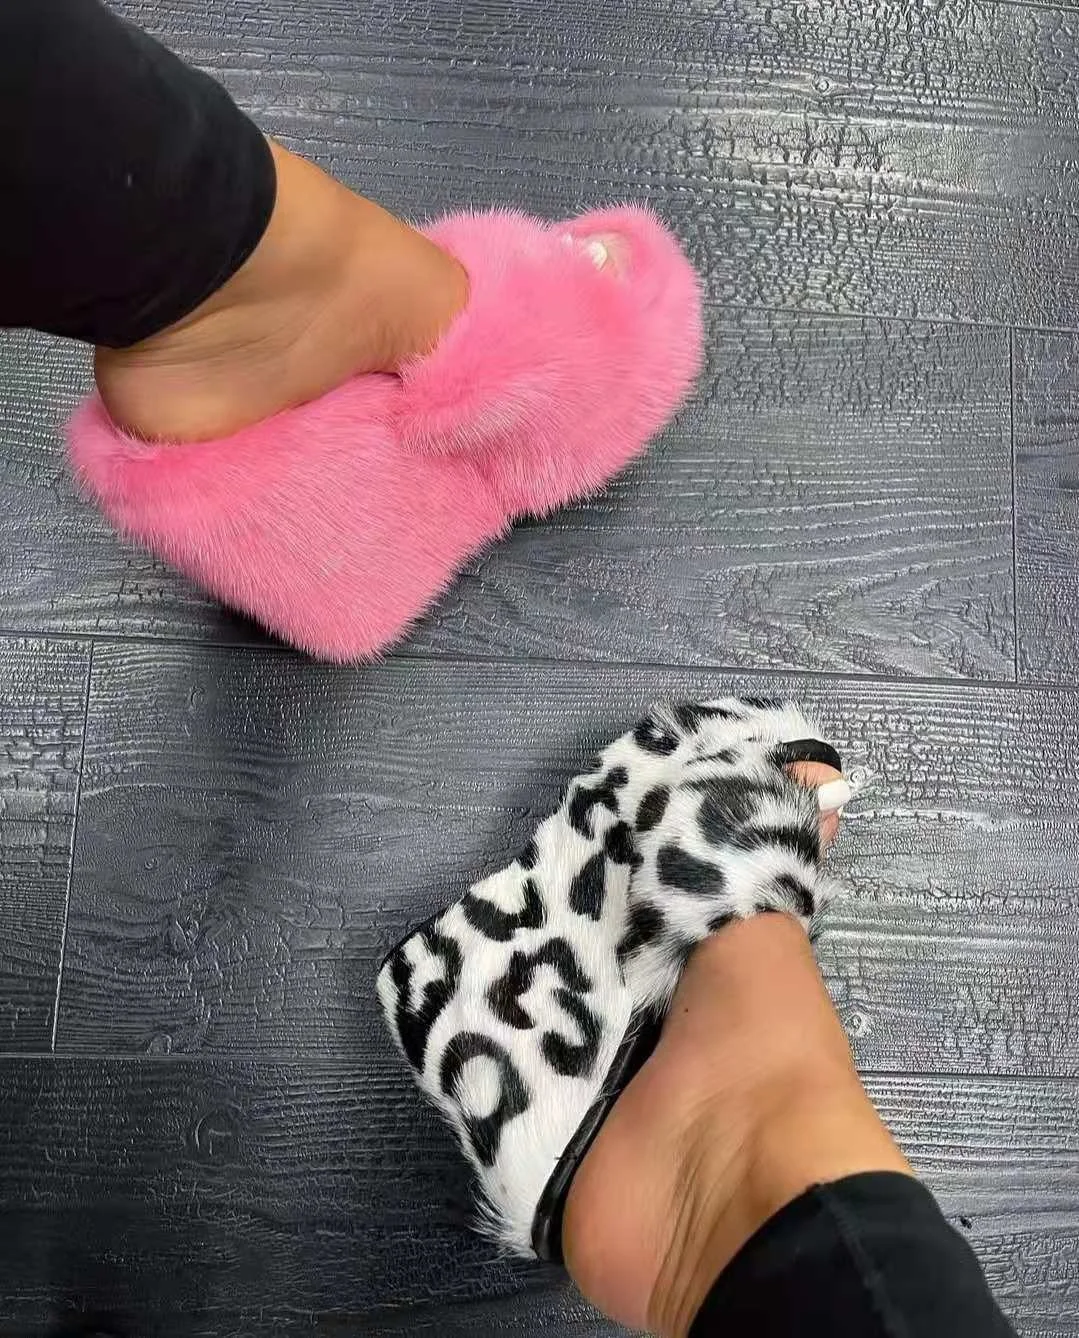 

Hot sale platform shoe slope heel women's pumps fashion fur slippers other trendy shoes thick heeled sandals, Customized color